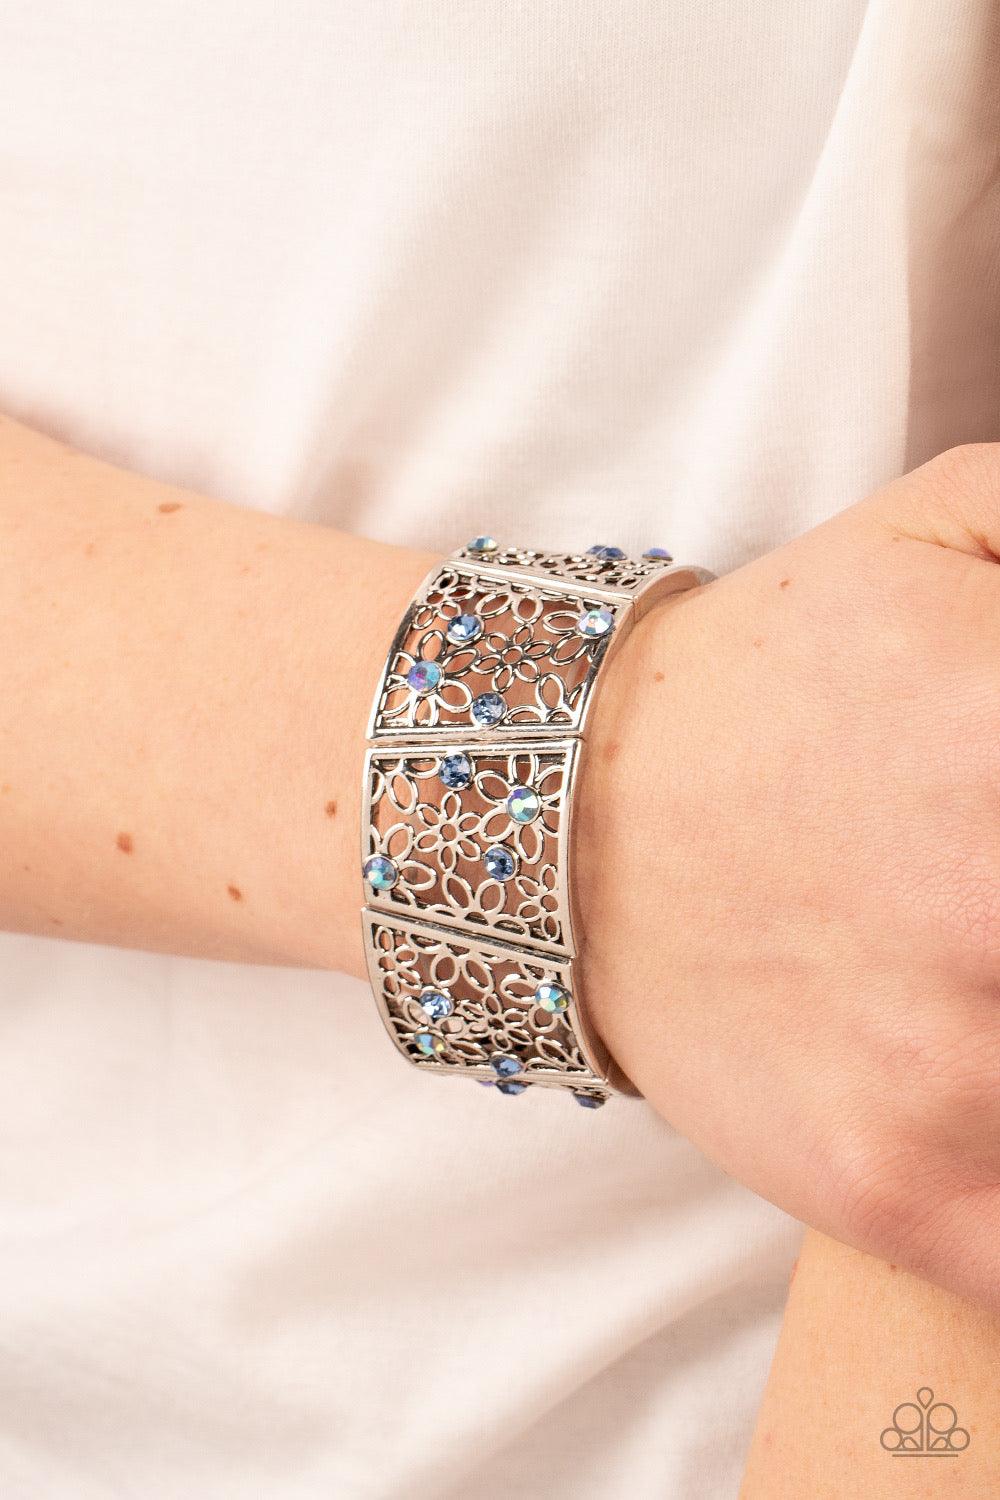 Paparazzi Accessories Spring Greetings - Blue Sporadically dotted with multicolored and iridescent rhinestones, an airy daisy pattern blooms inside trapezoidal silver frames that are threaded along stretchy bands around the wrist for a seasonal statement.